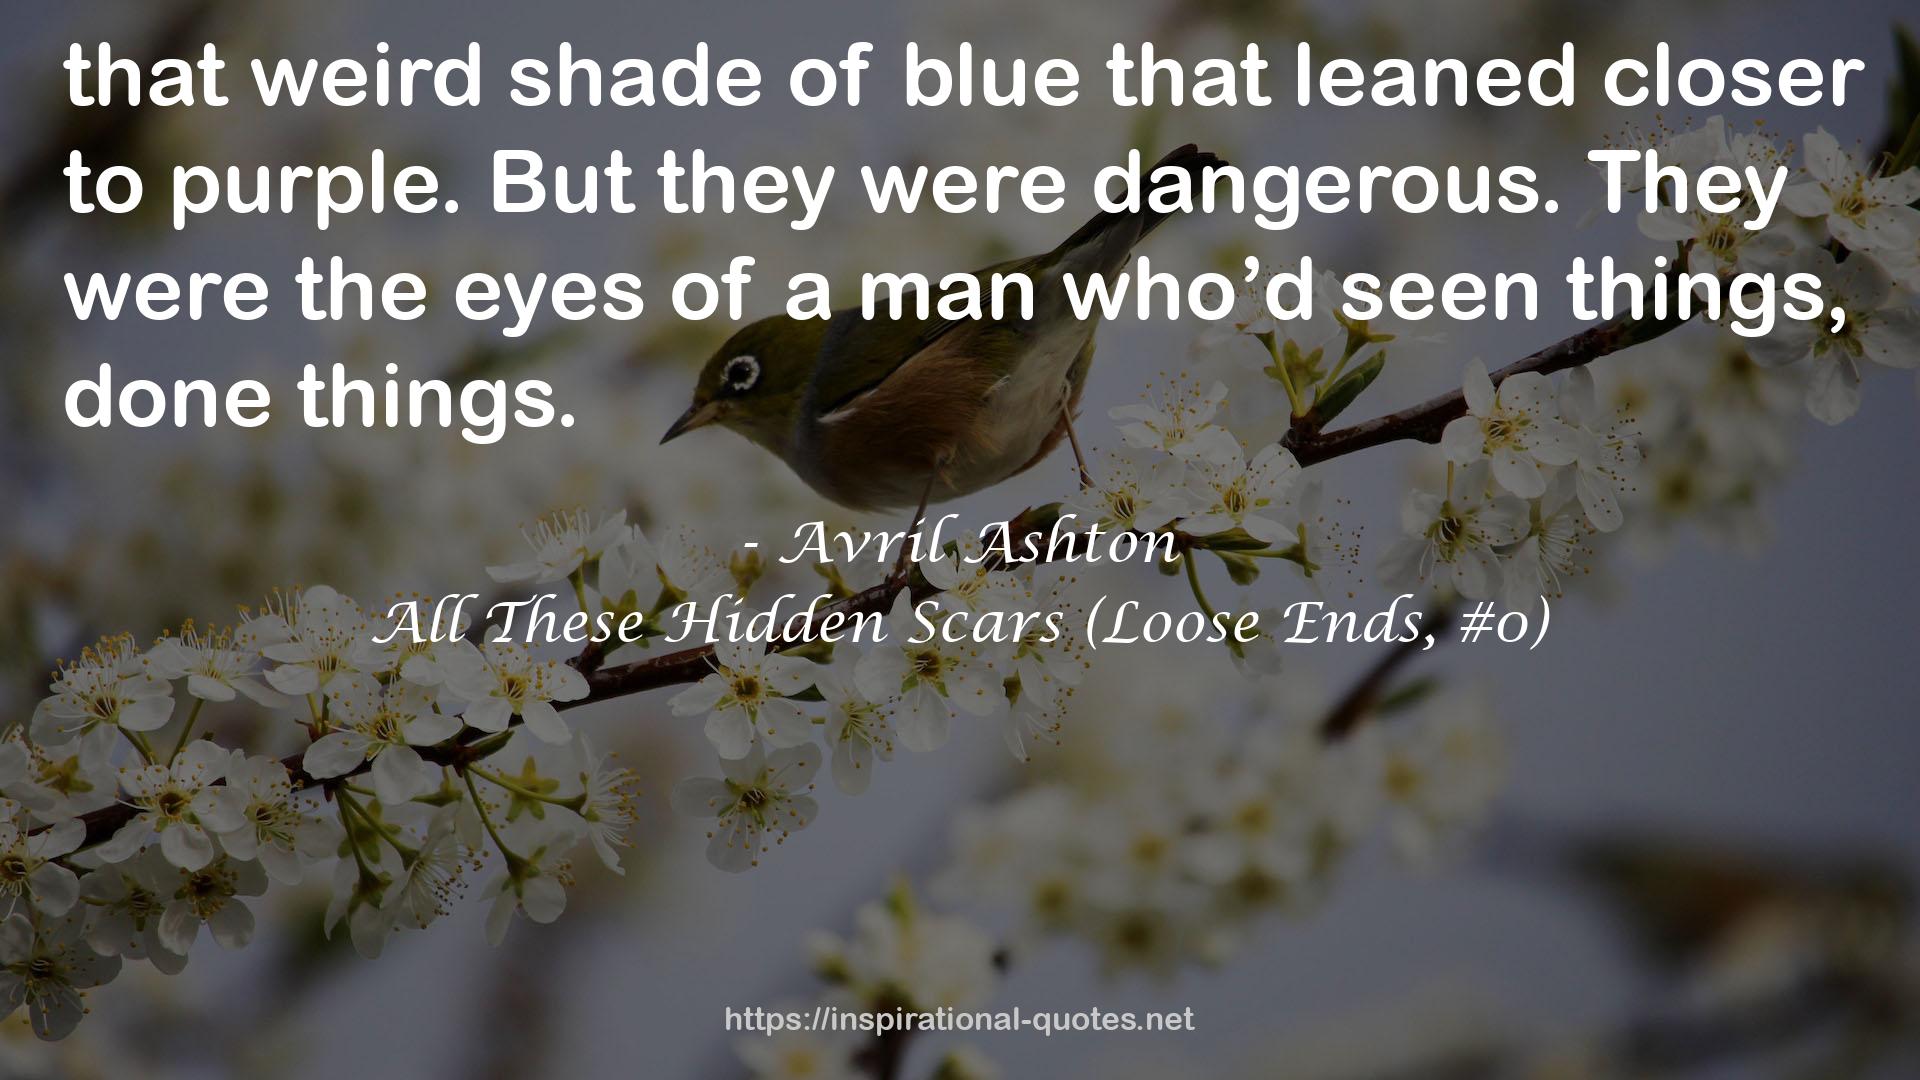 All These Hidden Scars (Loose Ends, #0) QUOTES